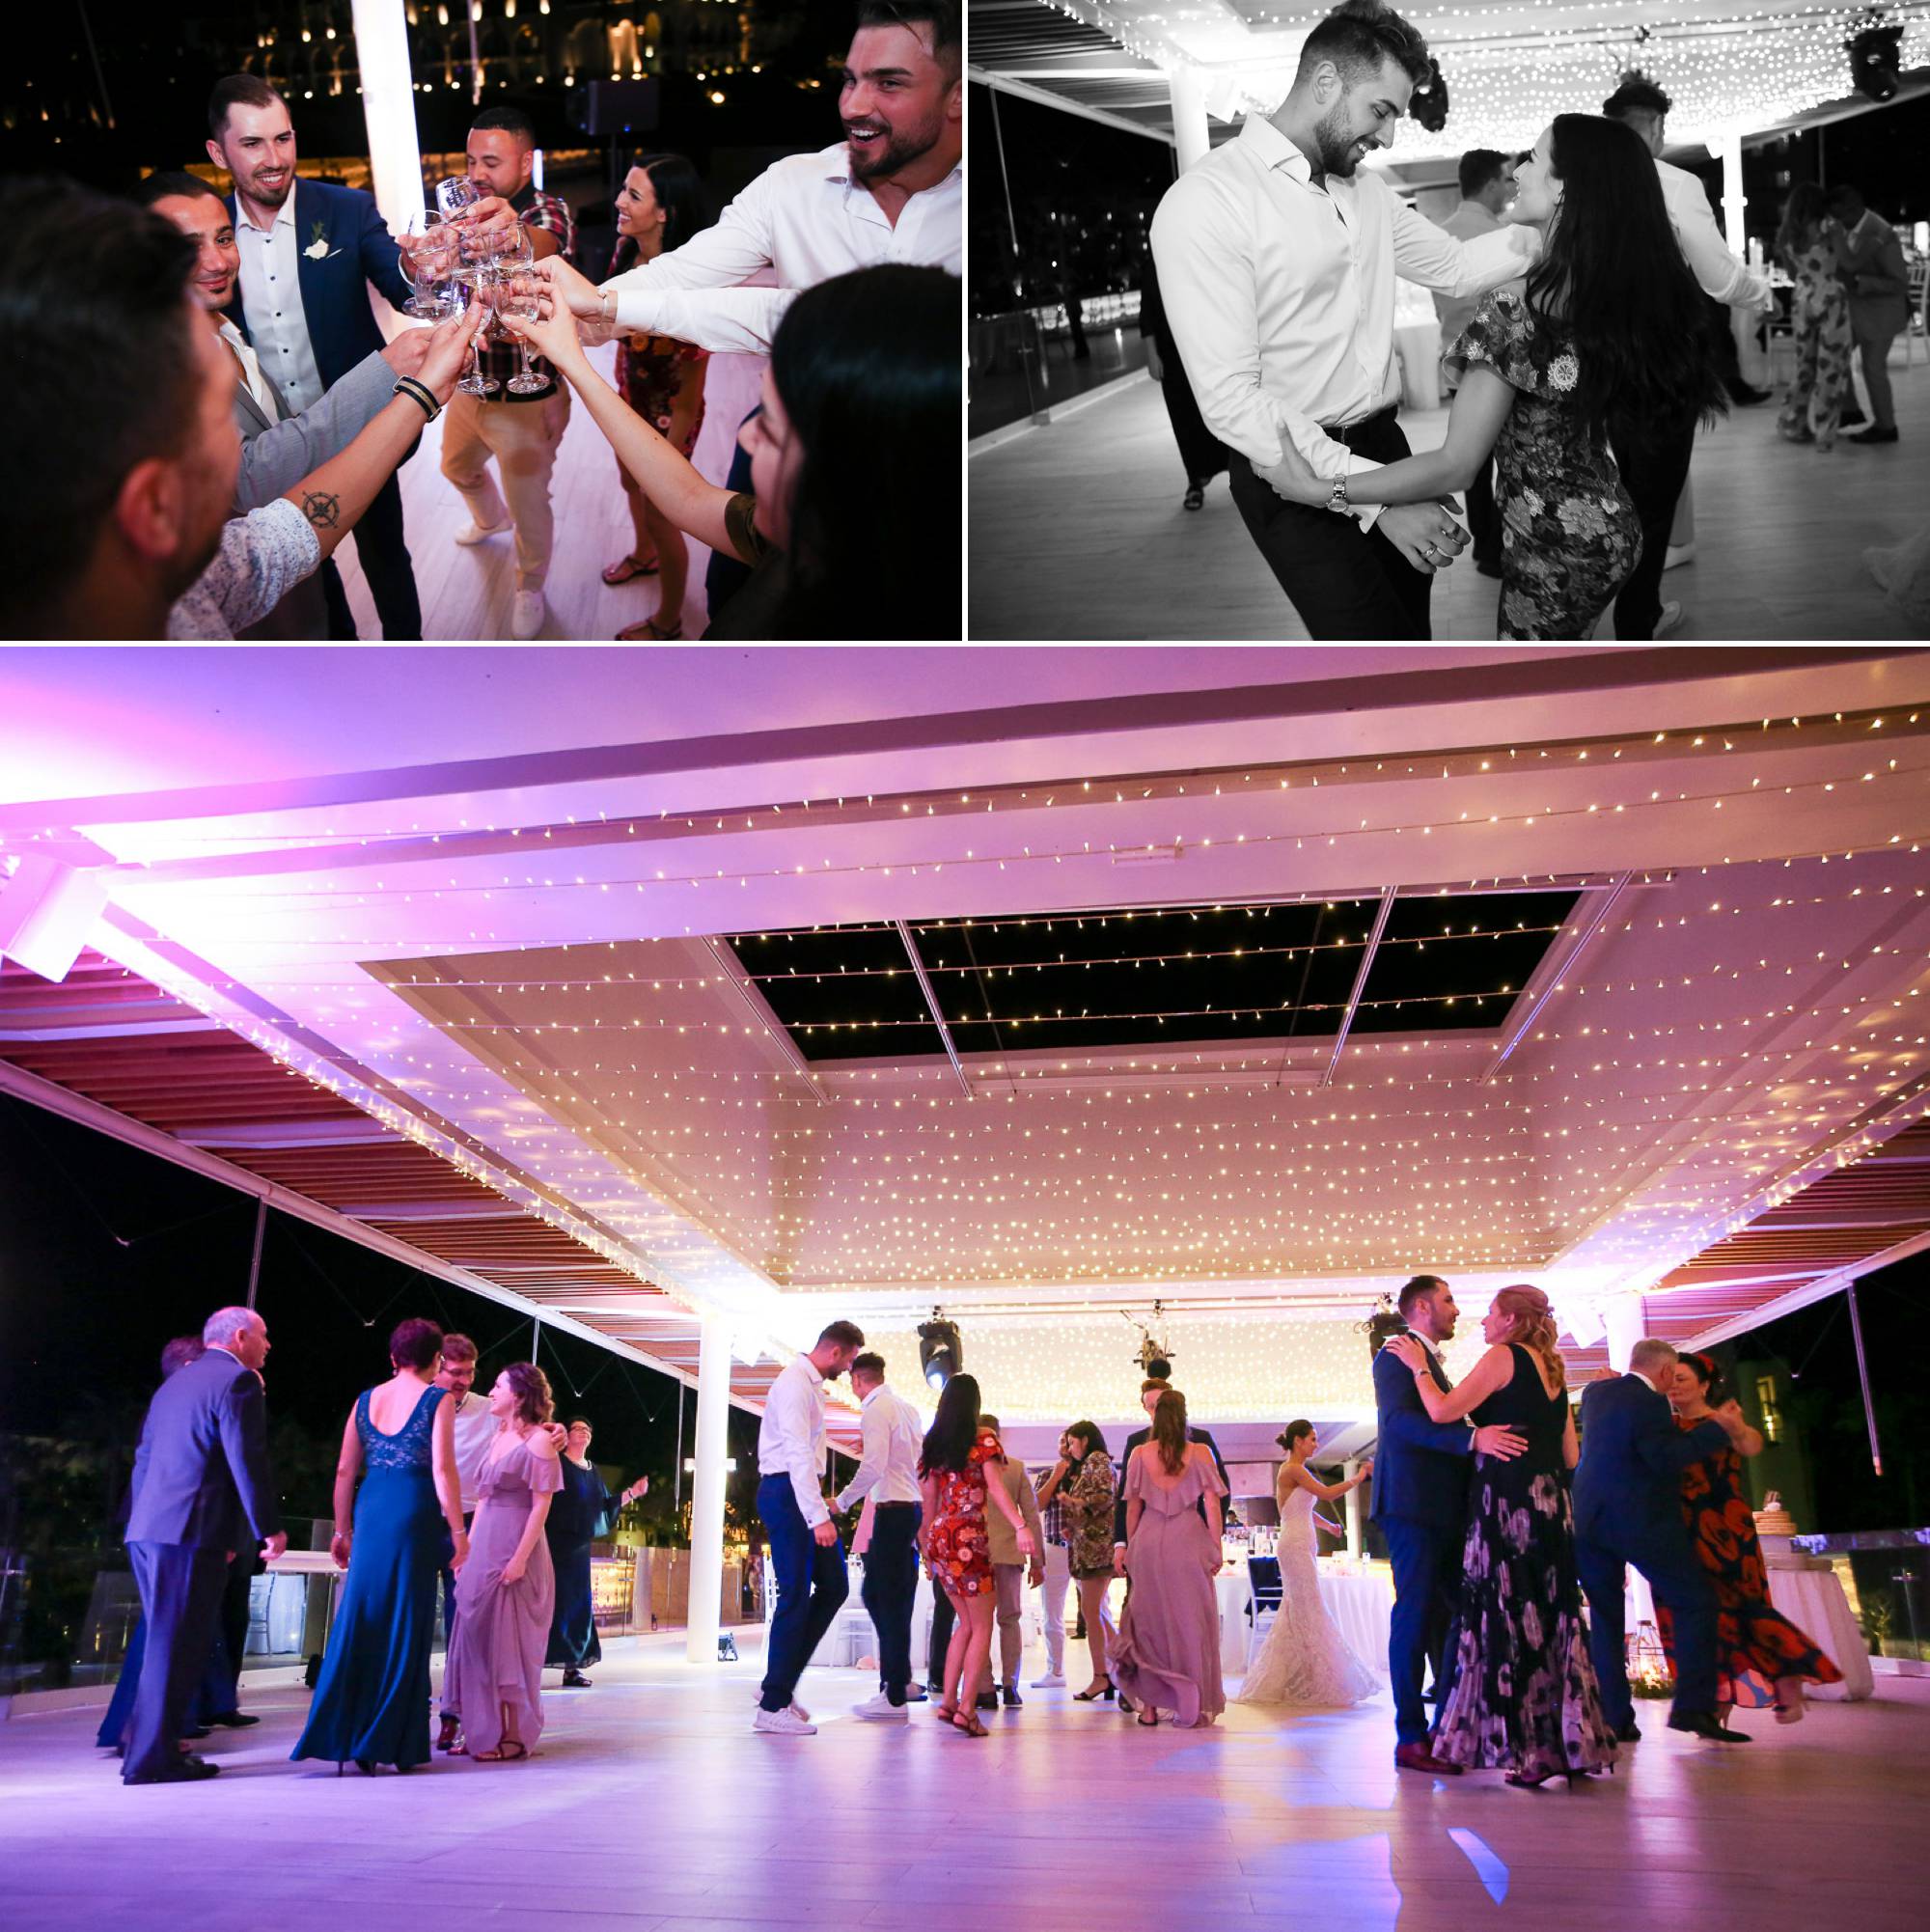 cheers with guests, candids of reception dancing